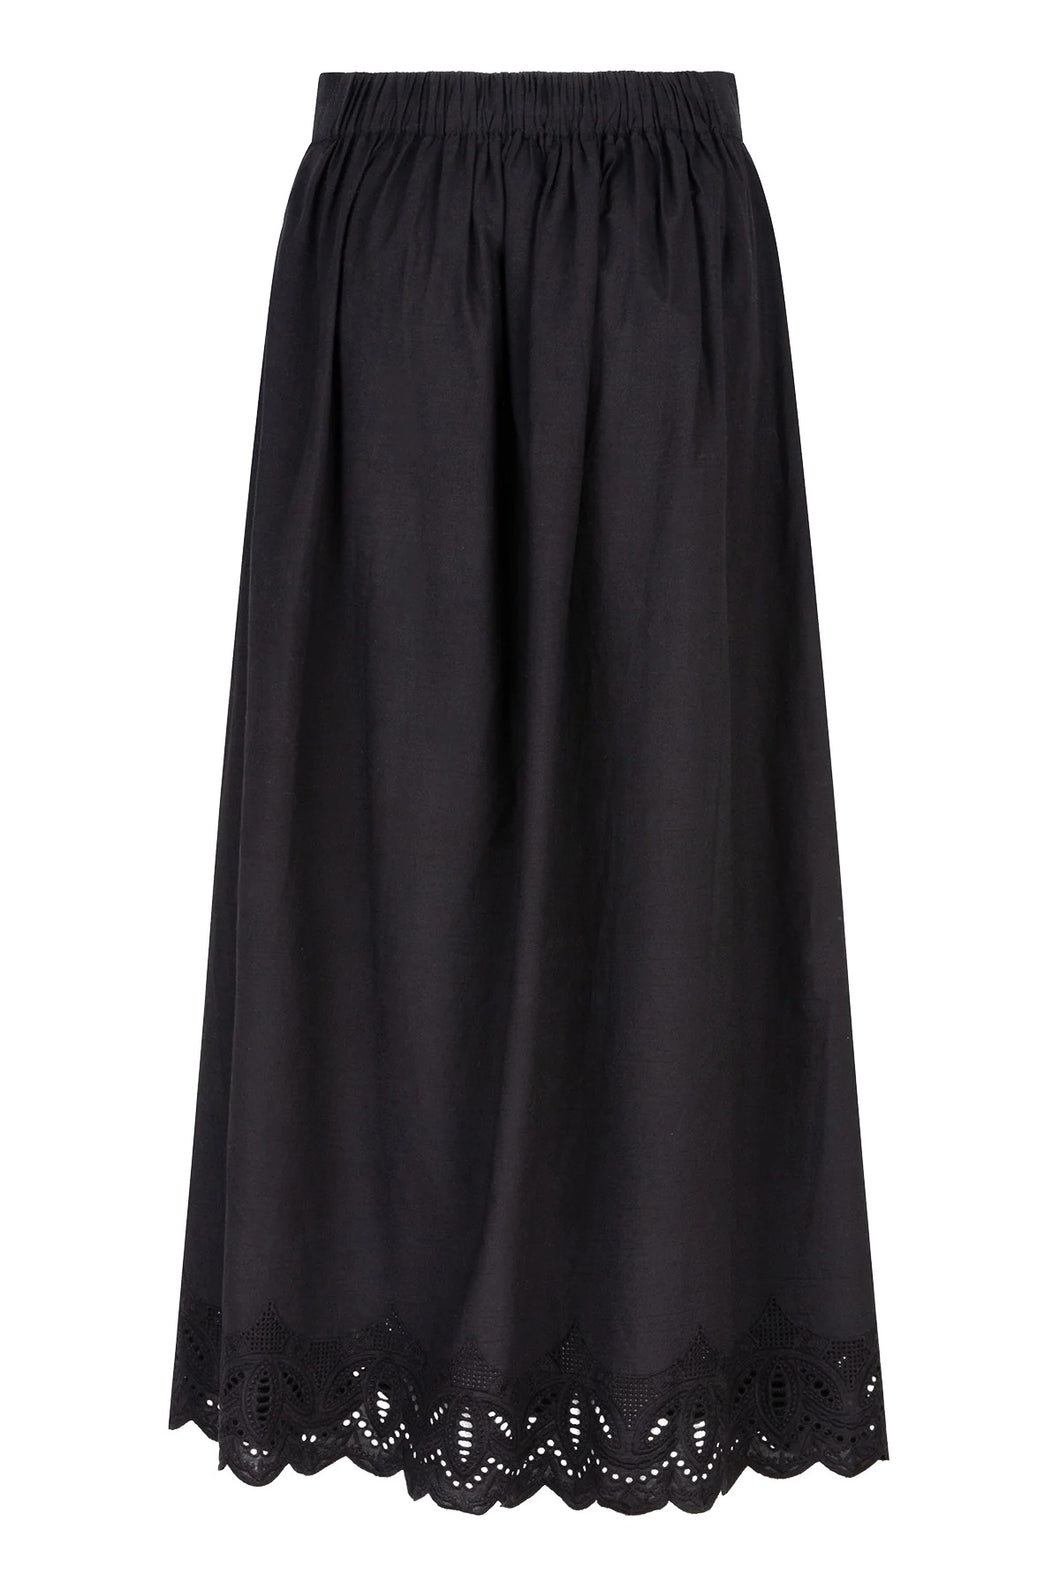 Ruby Tuesday Sabia Long Skirt Anthracite